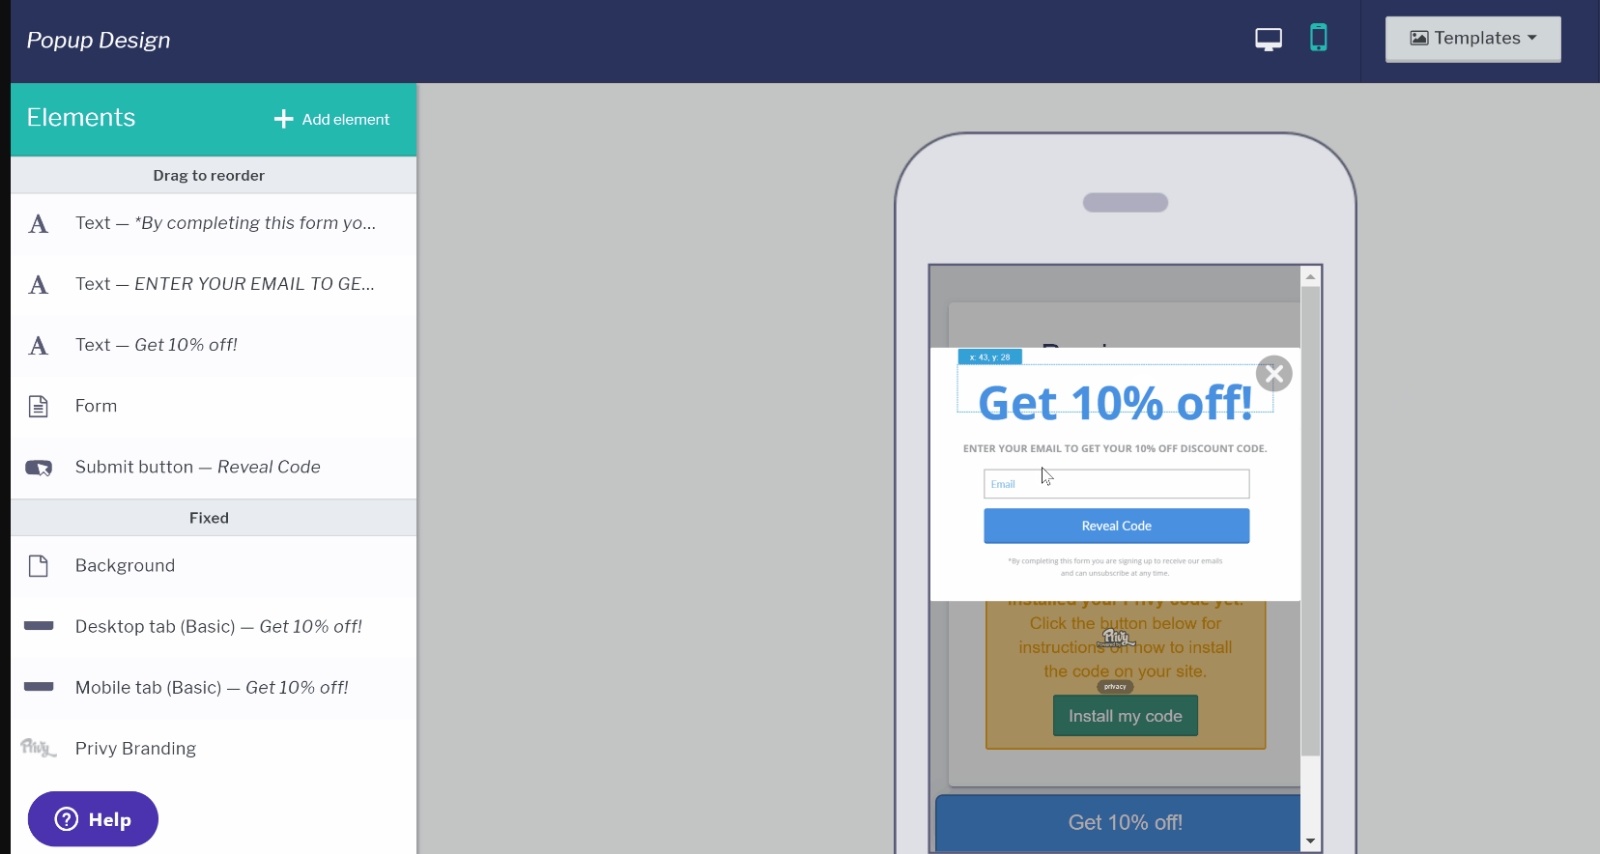 Privy – Best for Mobile-Optimized Popups